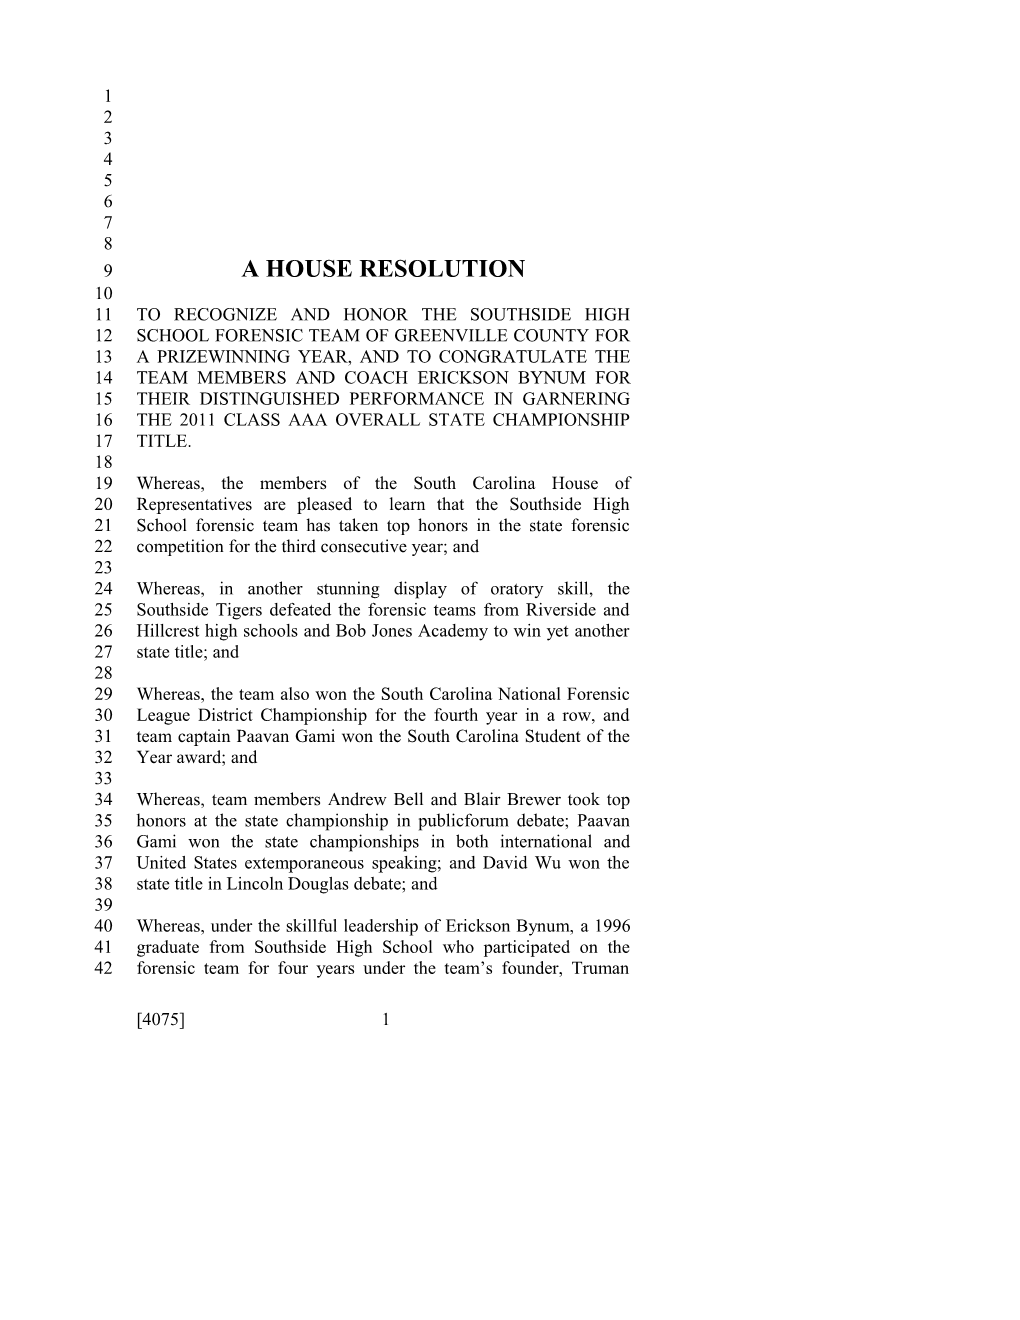 A House Resolution s18